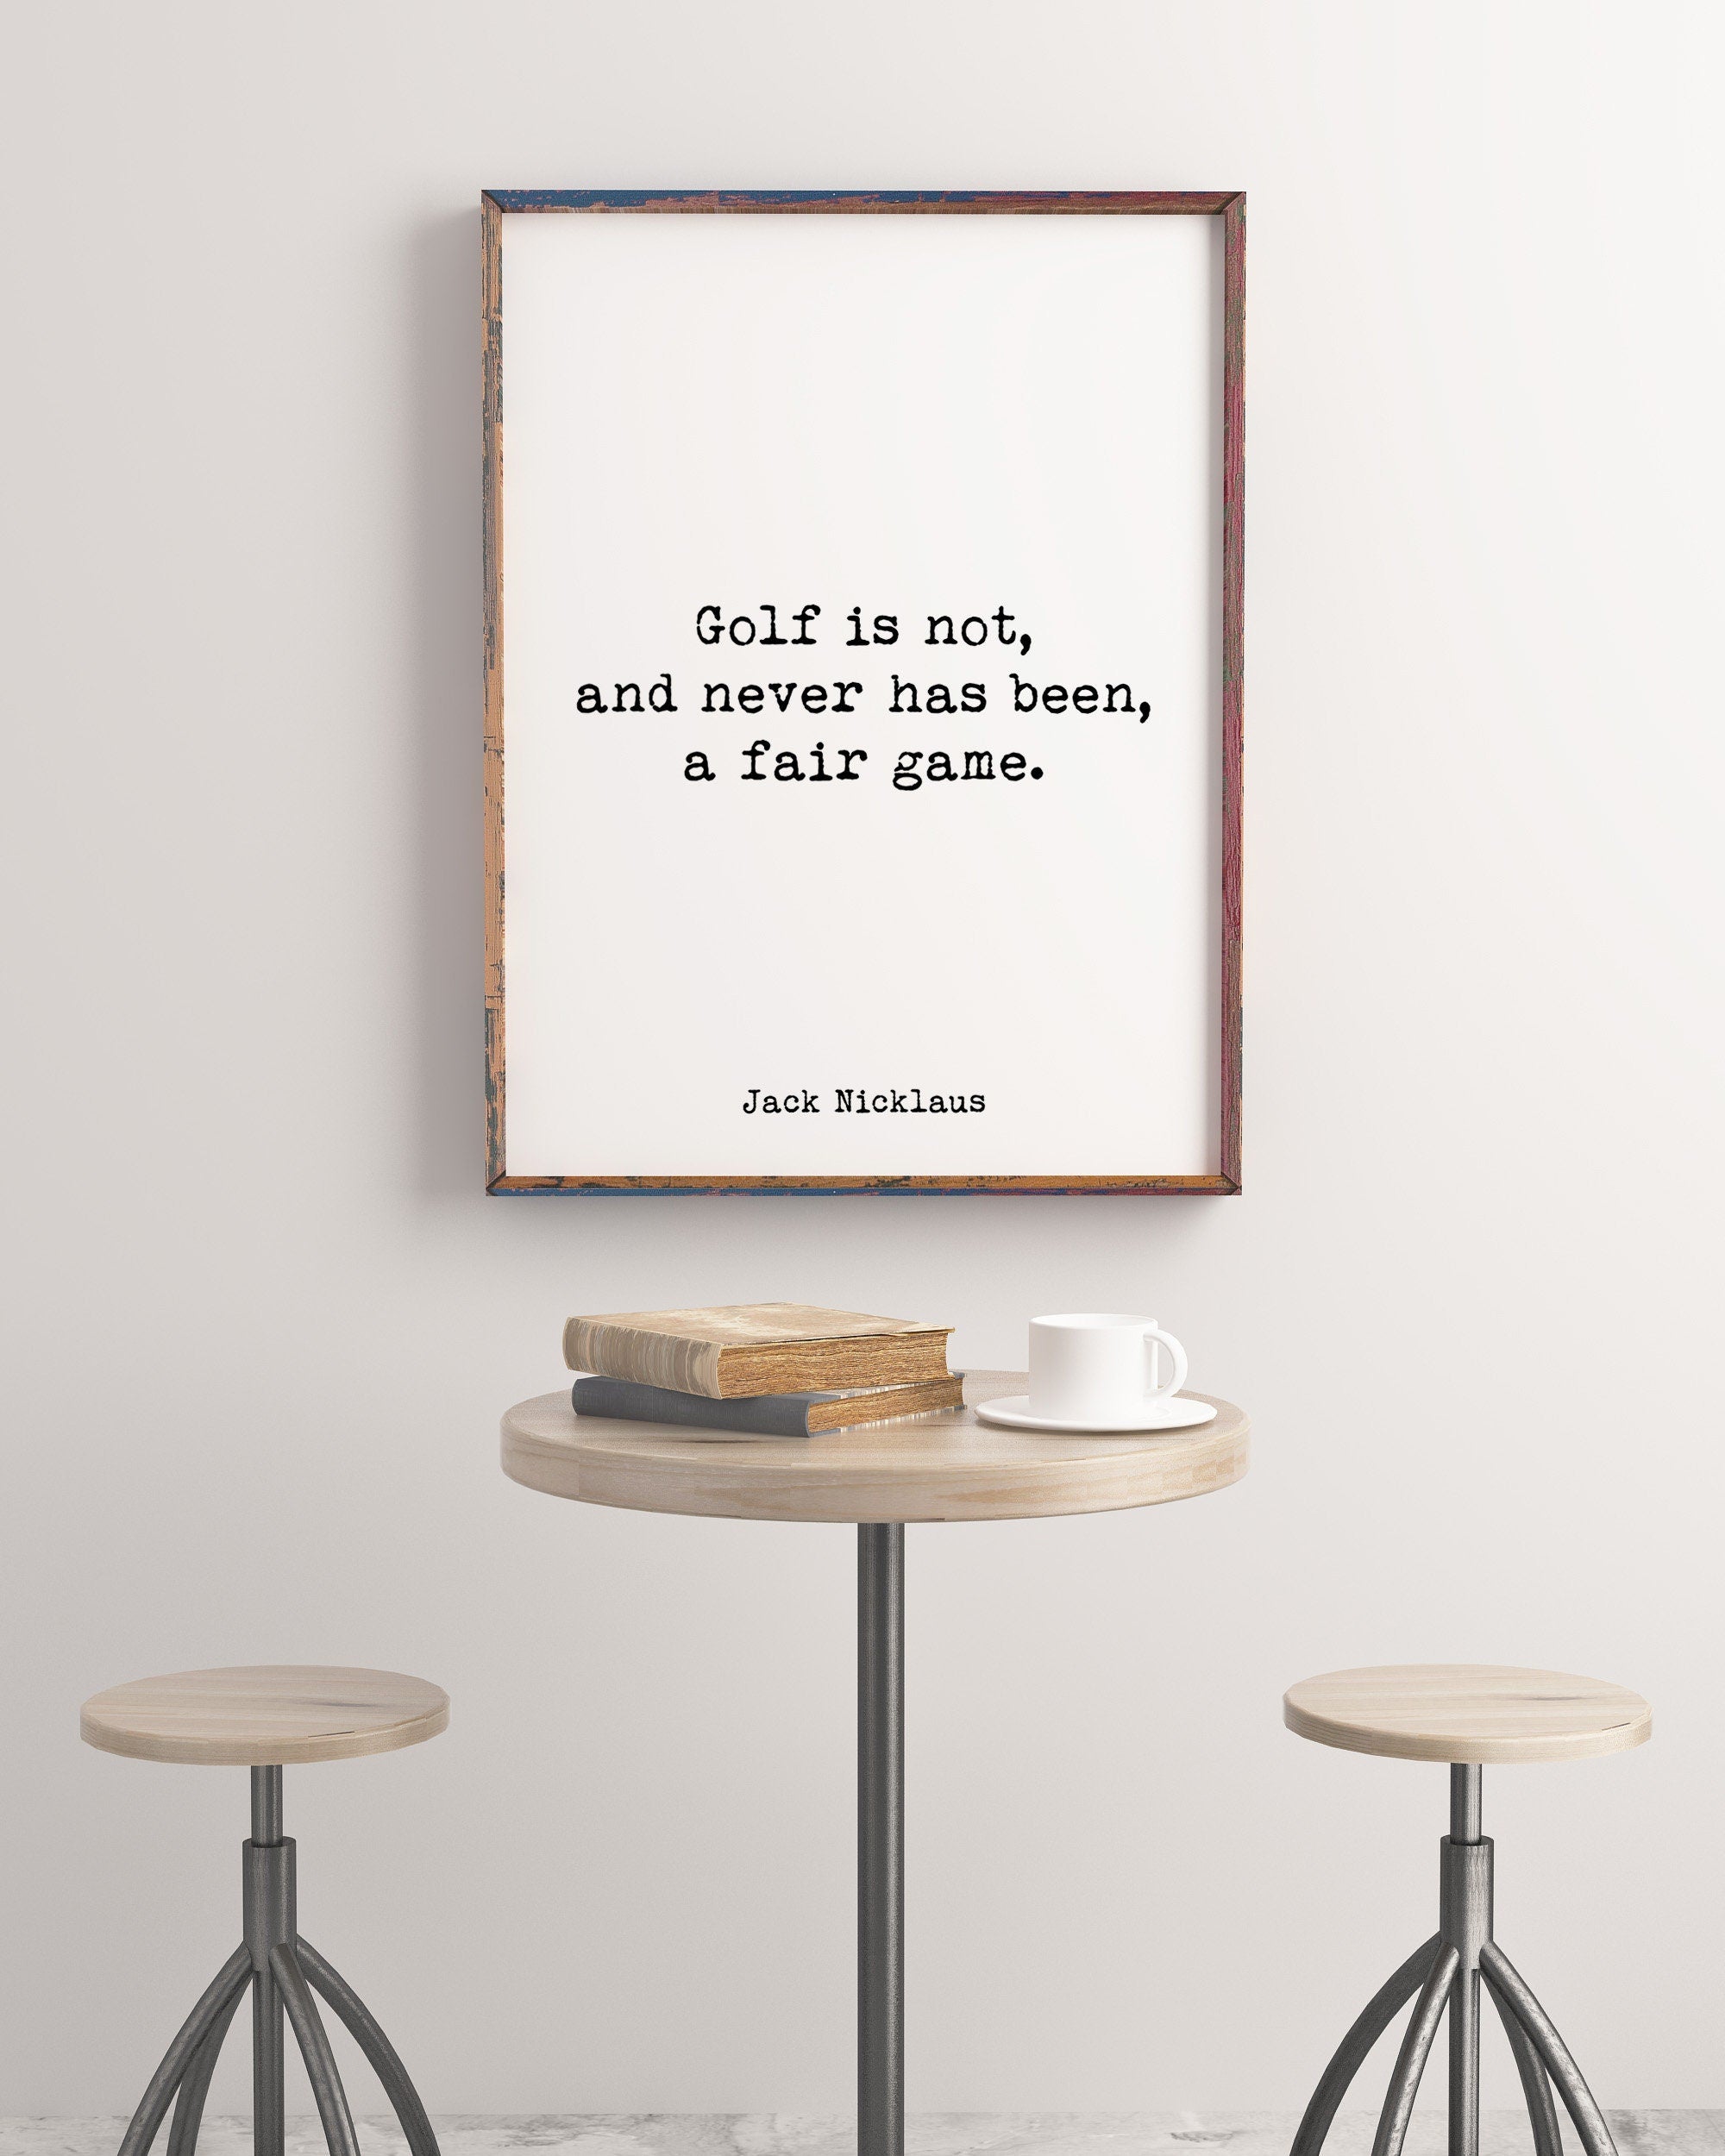 Jack Nicklaus Golf Quote Art Print, Golf is not